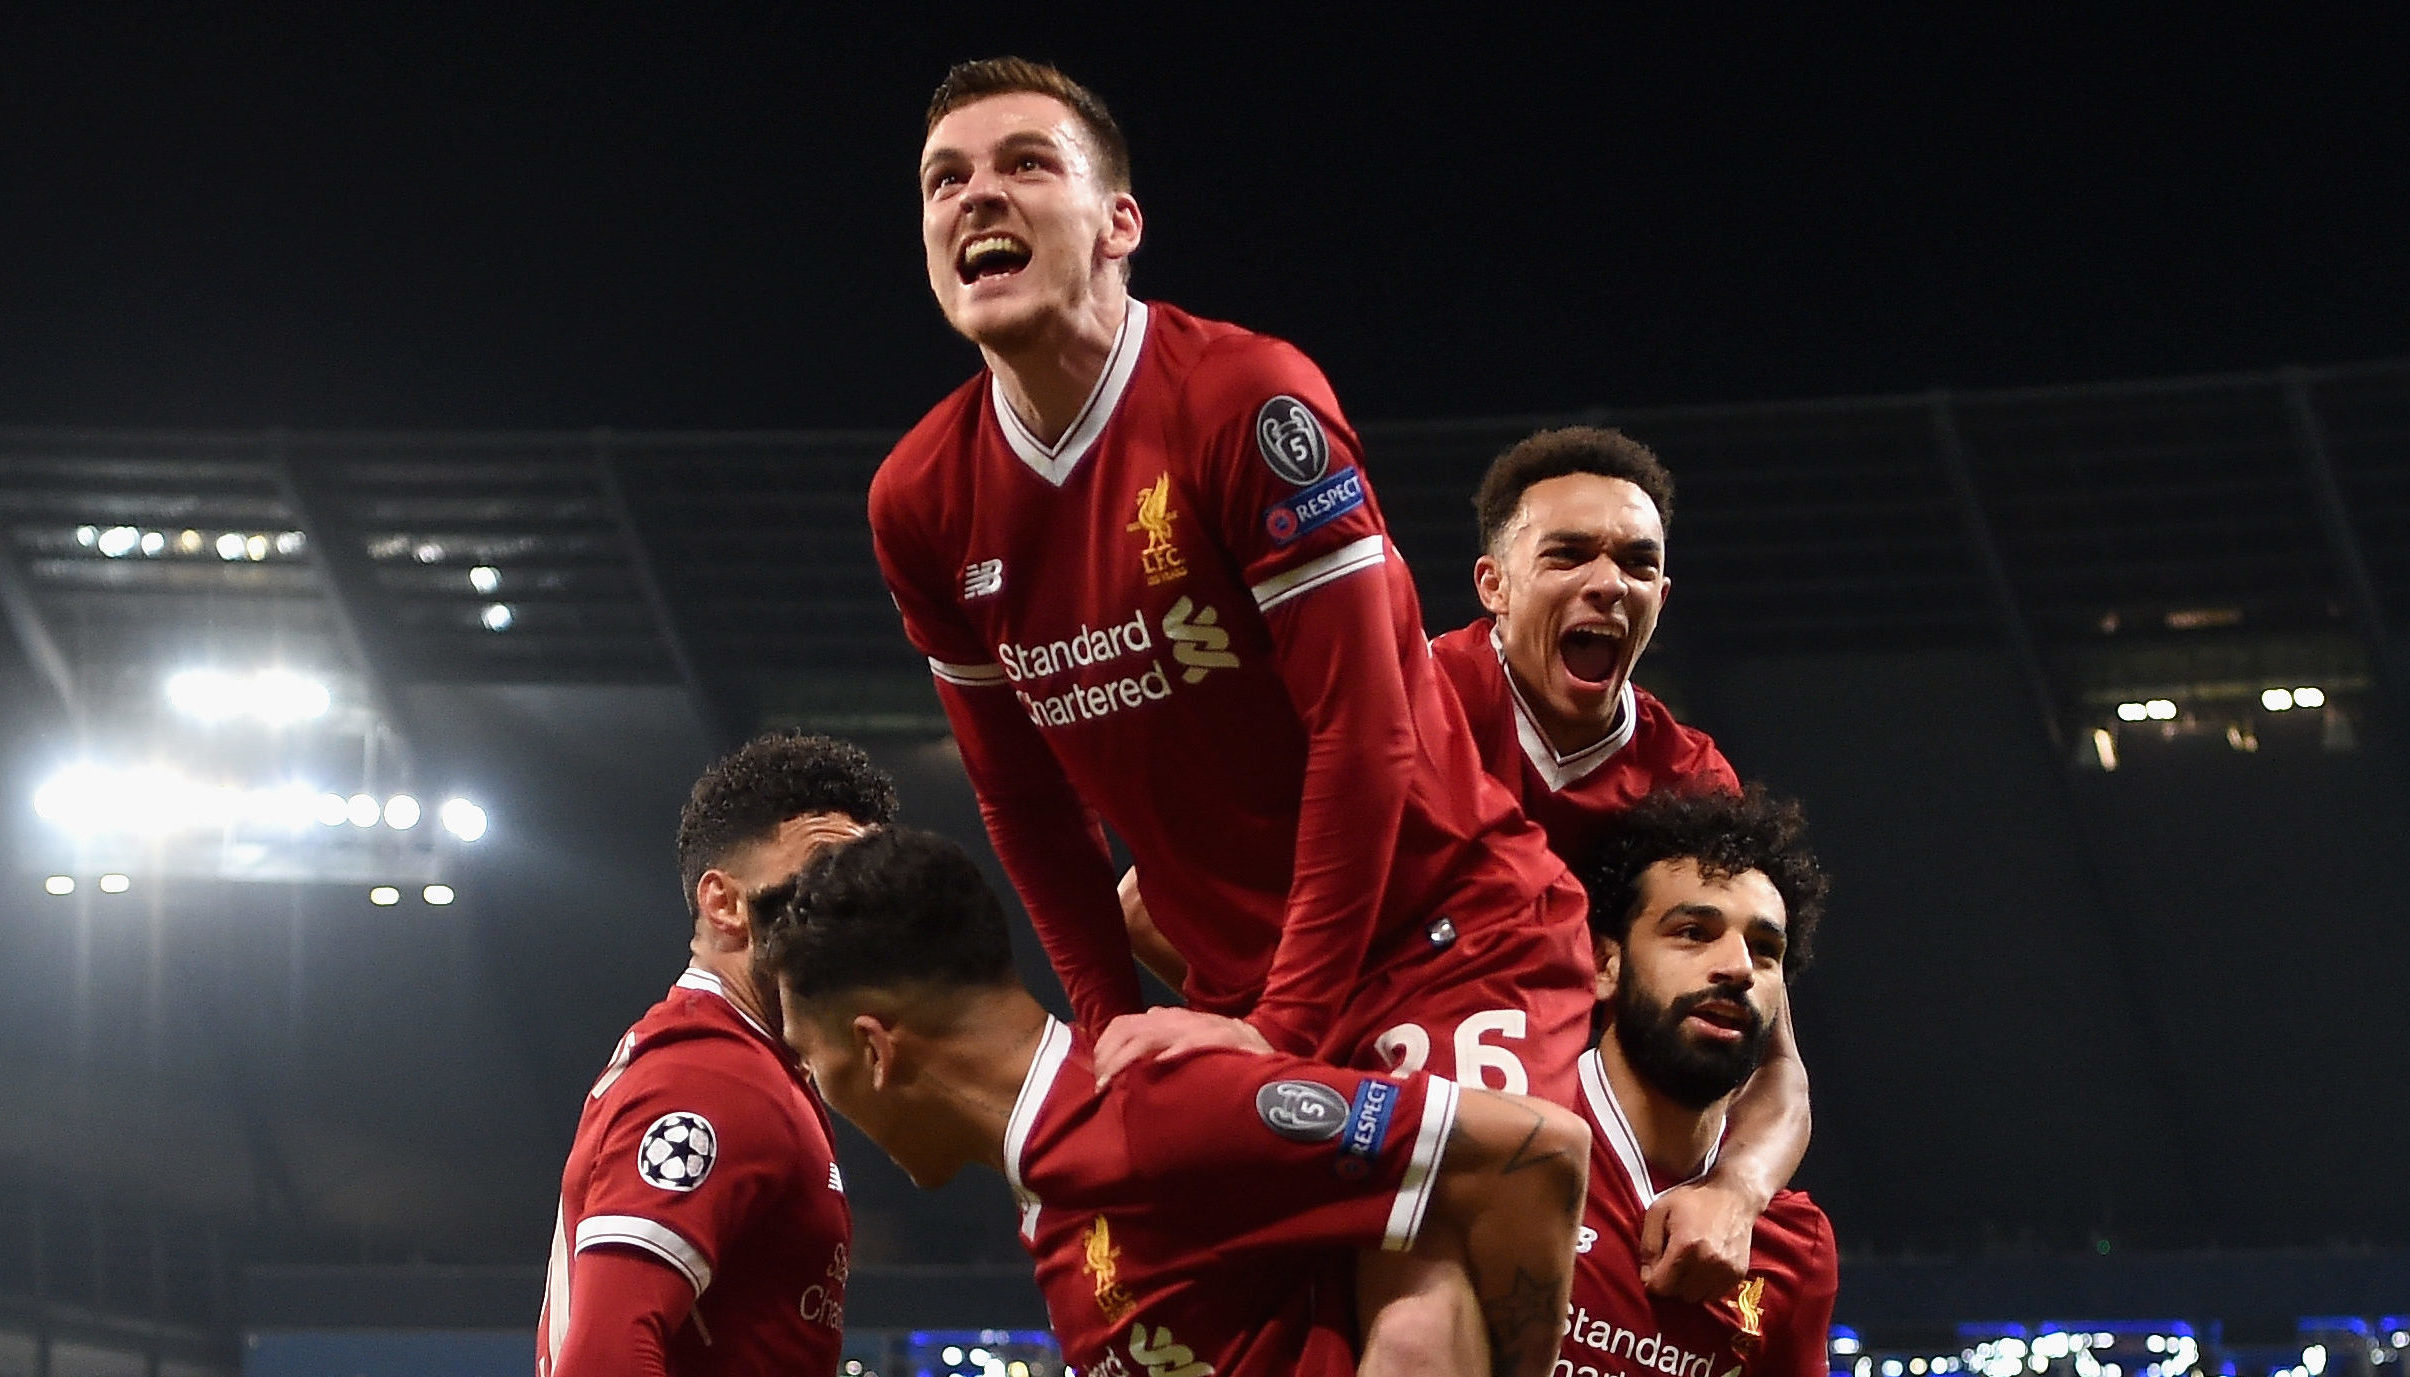 Andy Robertson celebrates with his Liverpool teammates.